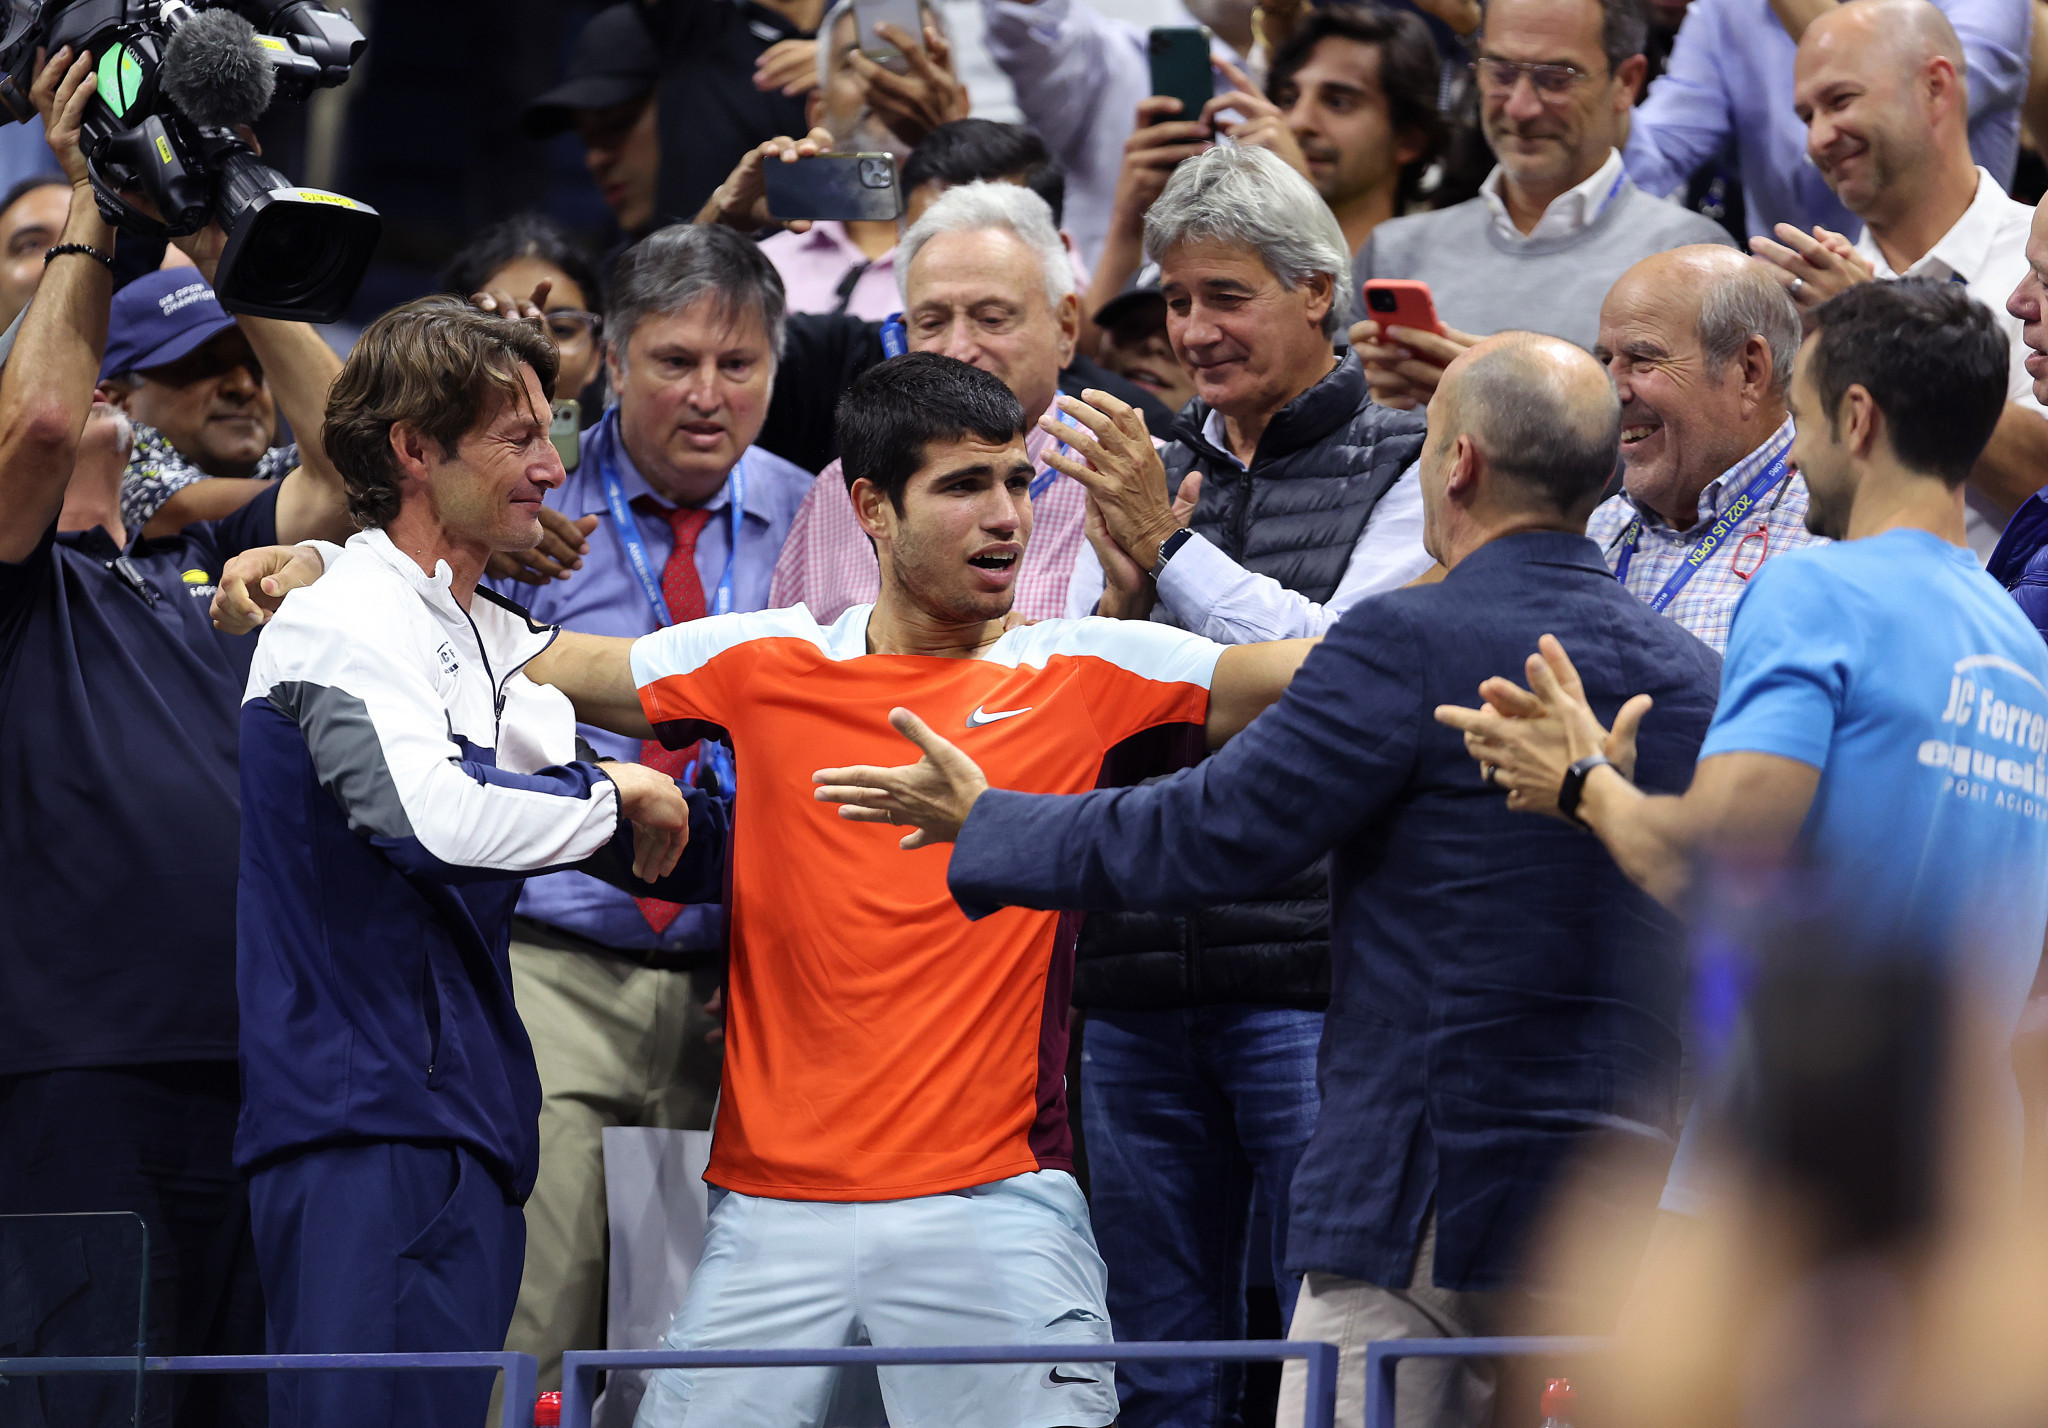 Carlos Alcaraz celebrates with his support team after winning the US Open title ©Getty Images